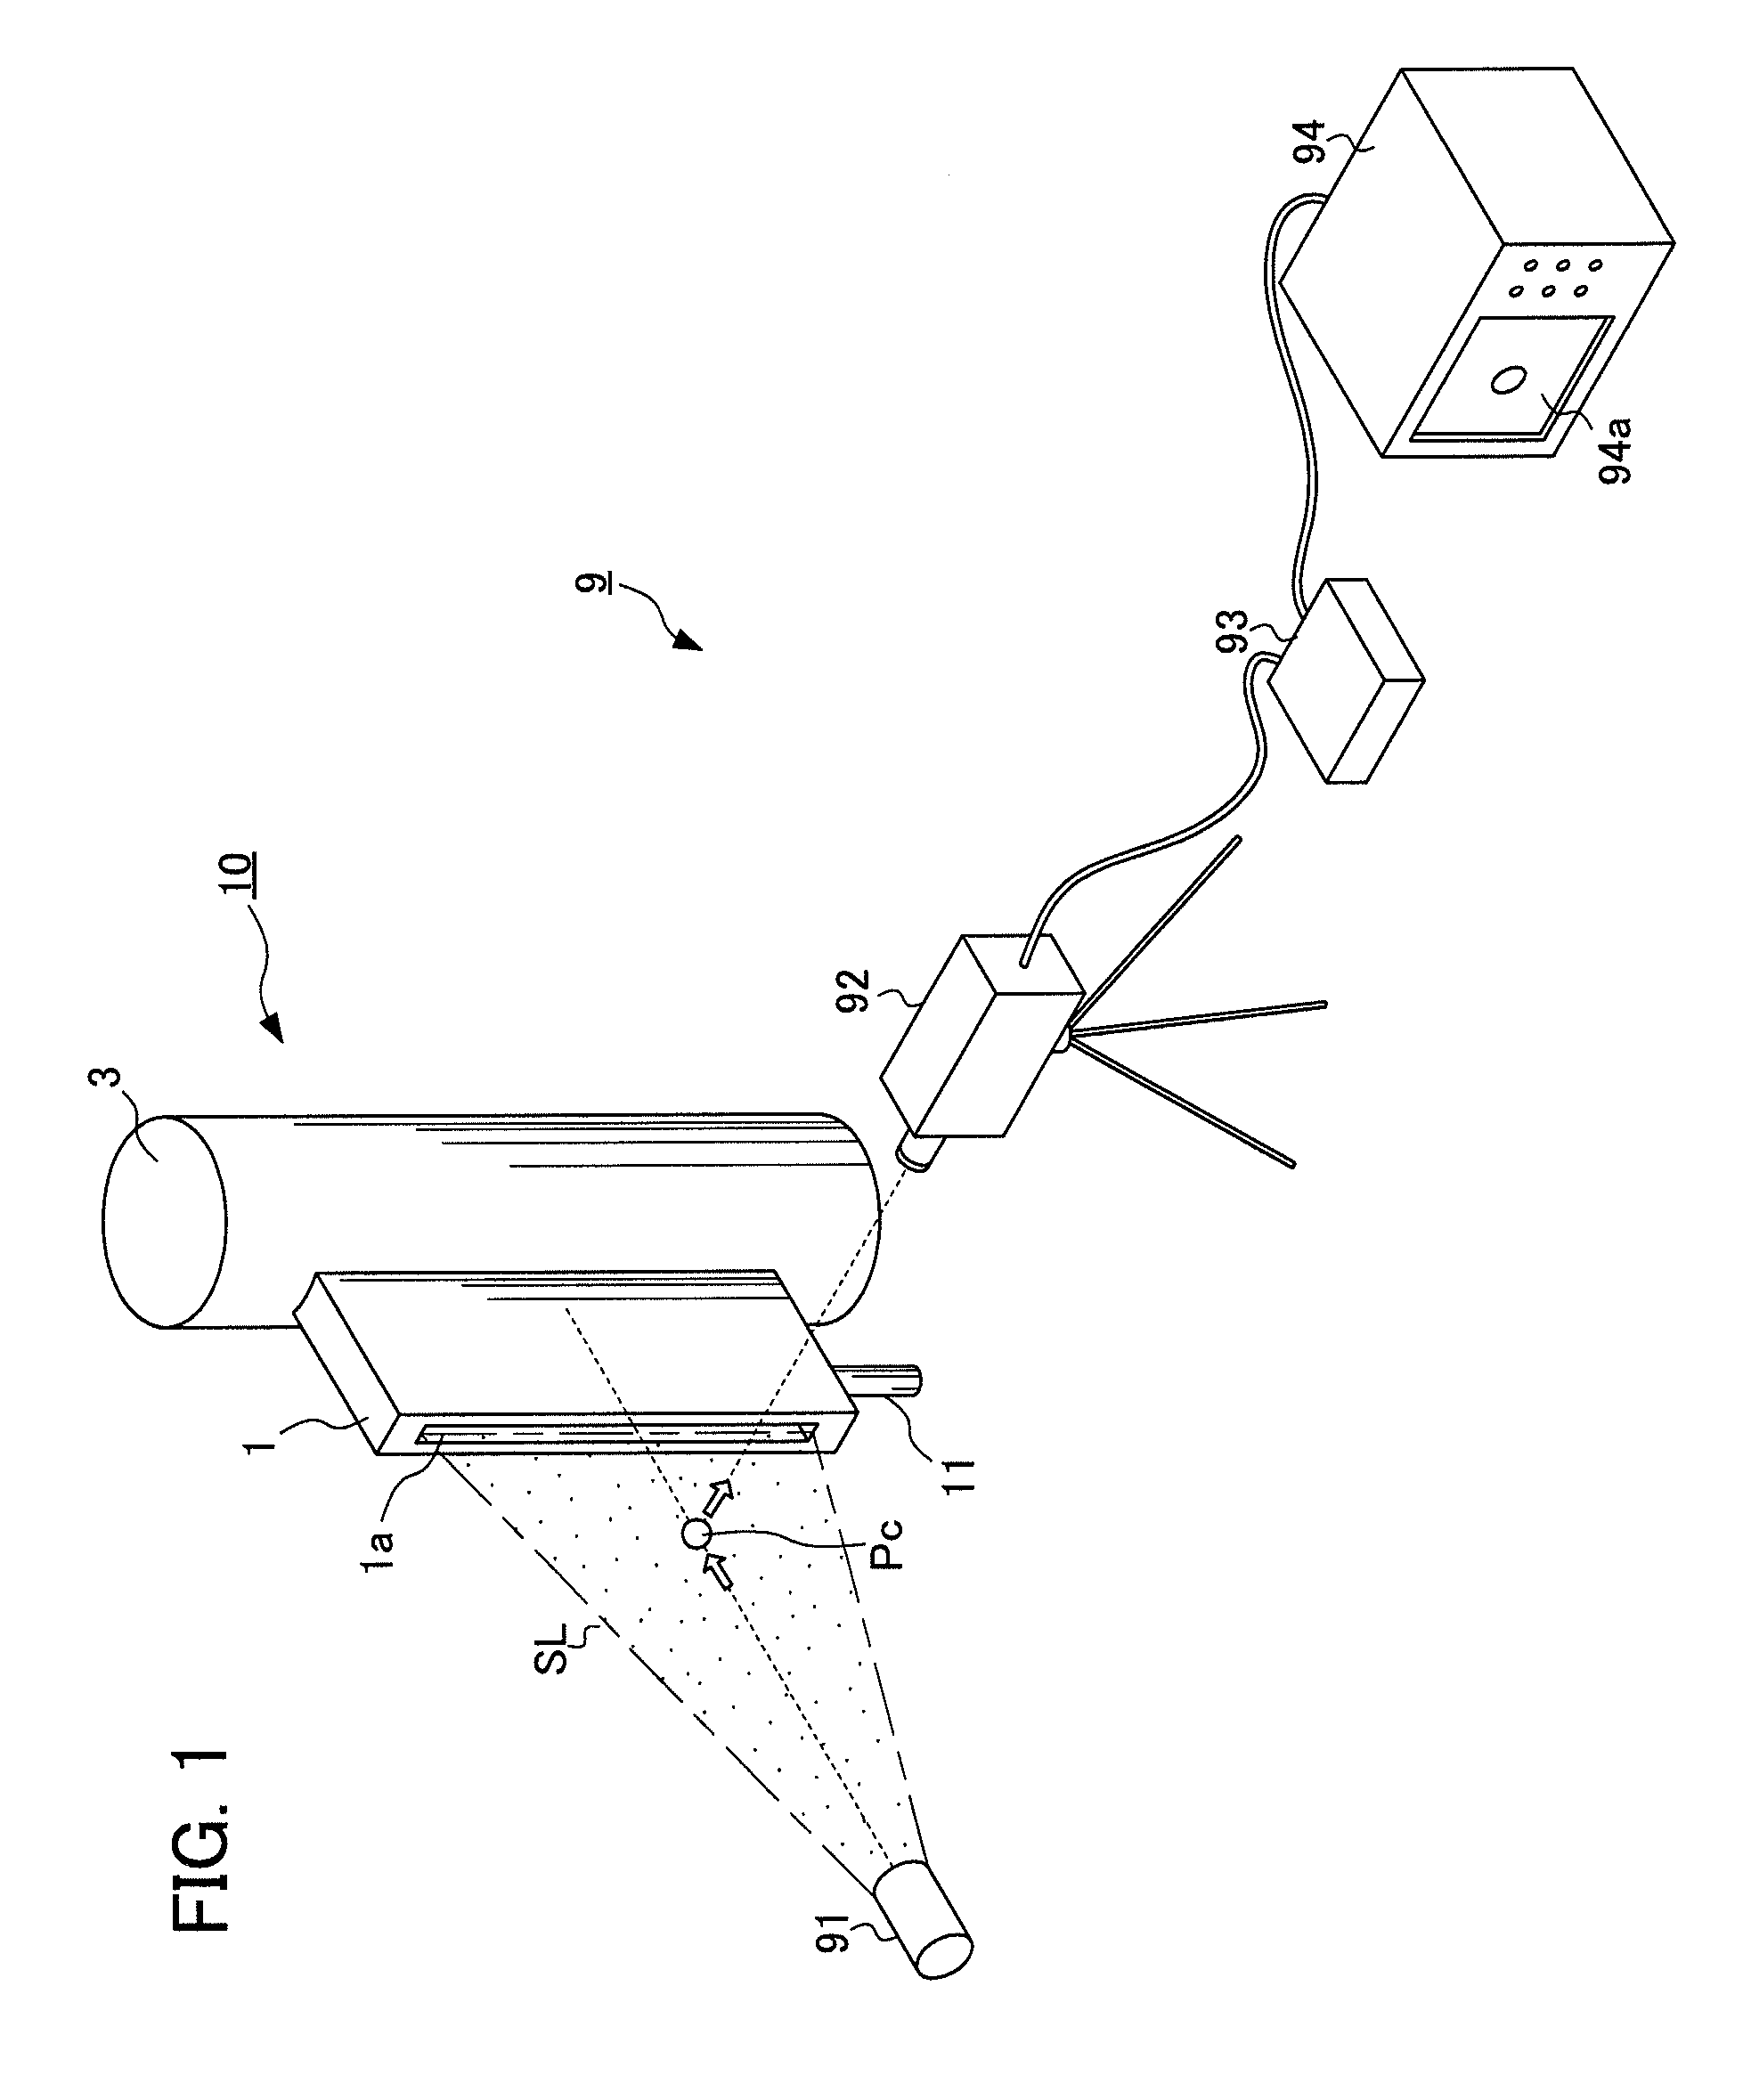 Apparatus for removing reflected light